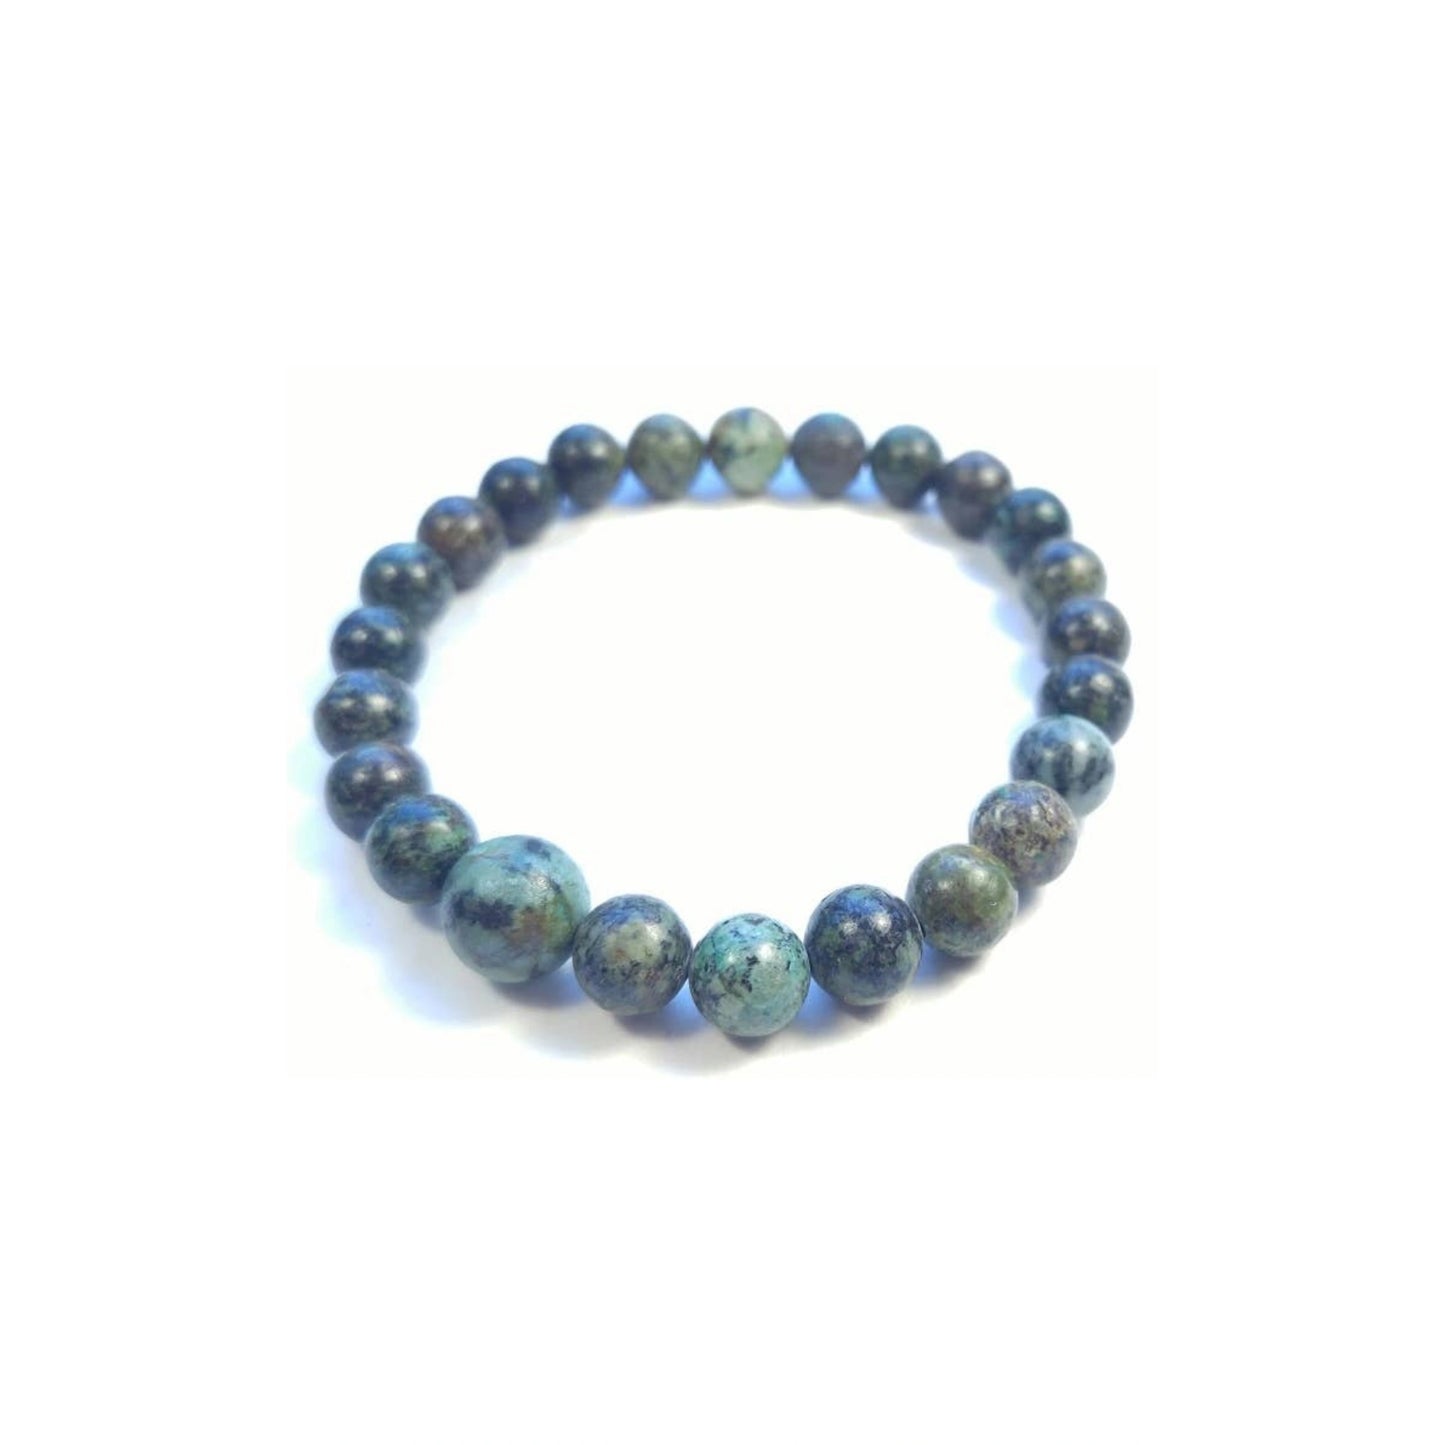 African Turquoise Stretchy Beaded Bracelet - Wrist Mala 8mm (2 Pack)